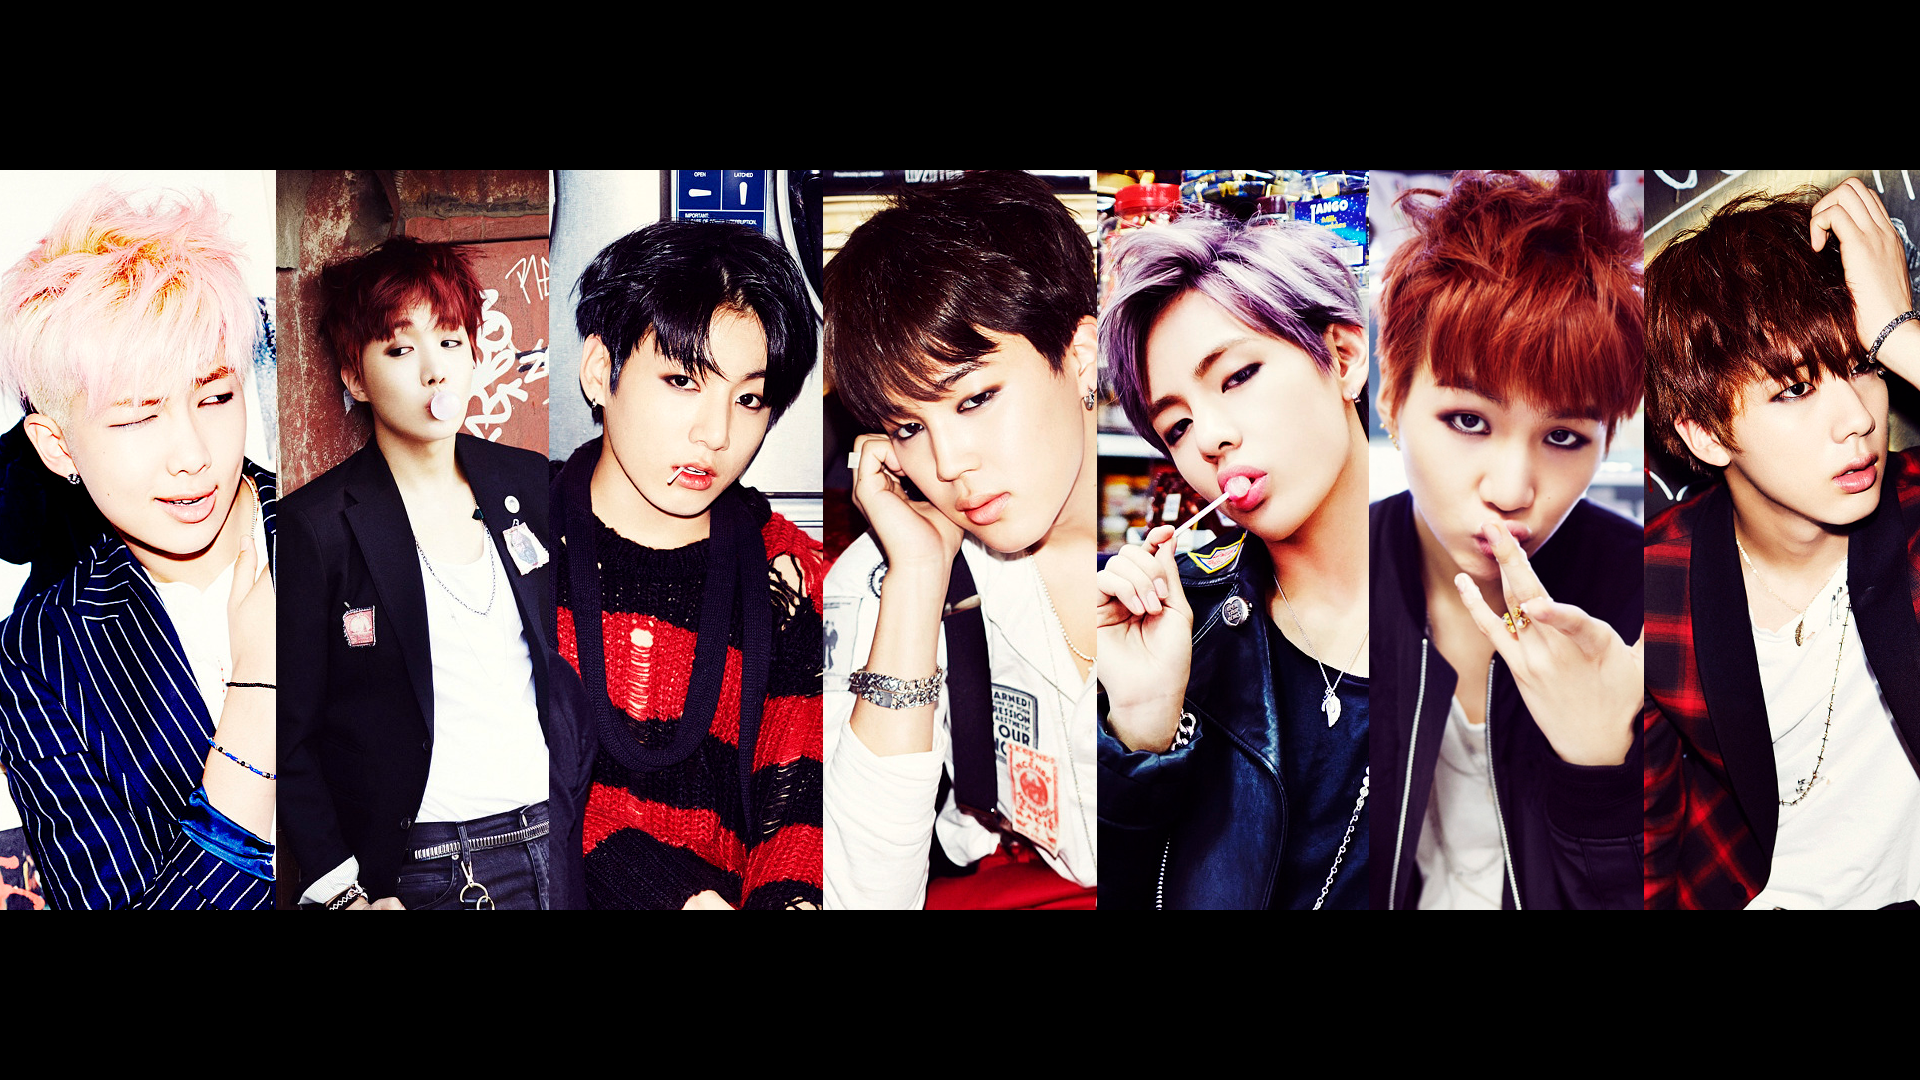 Free download BTS Wallpaper High Quality Download [1920x1080]